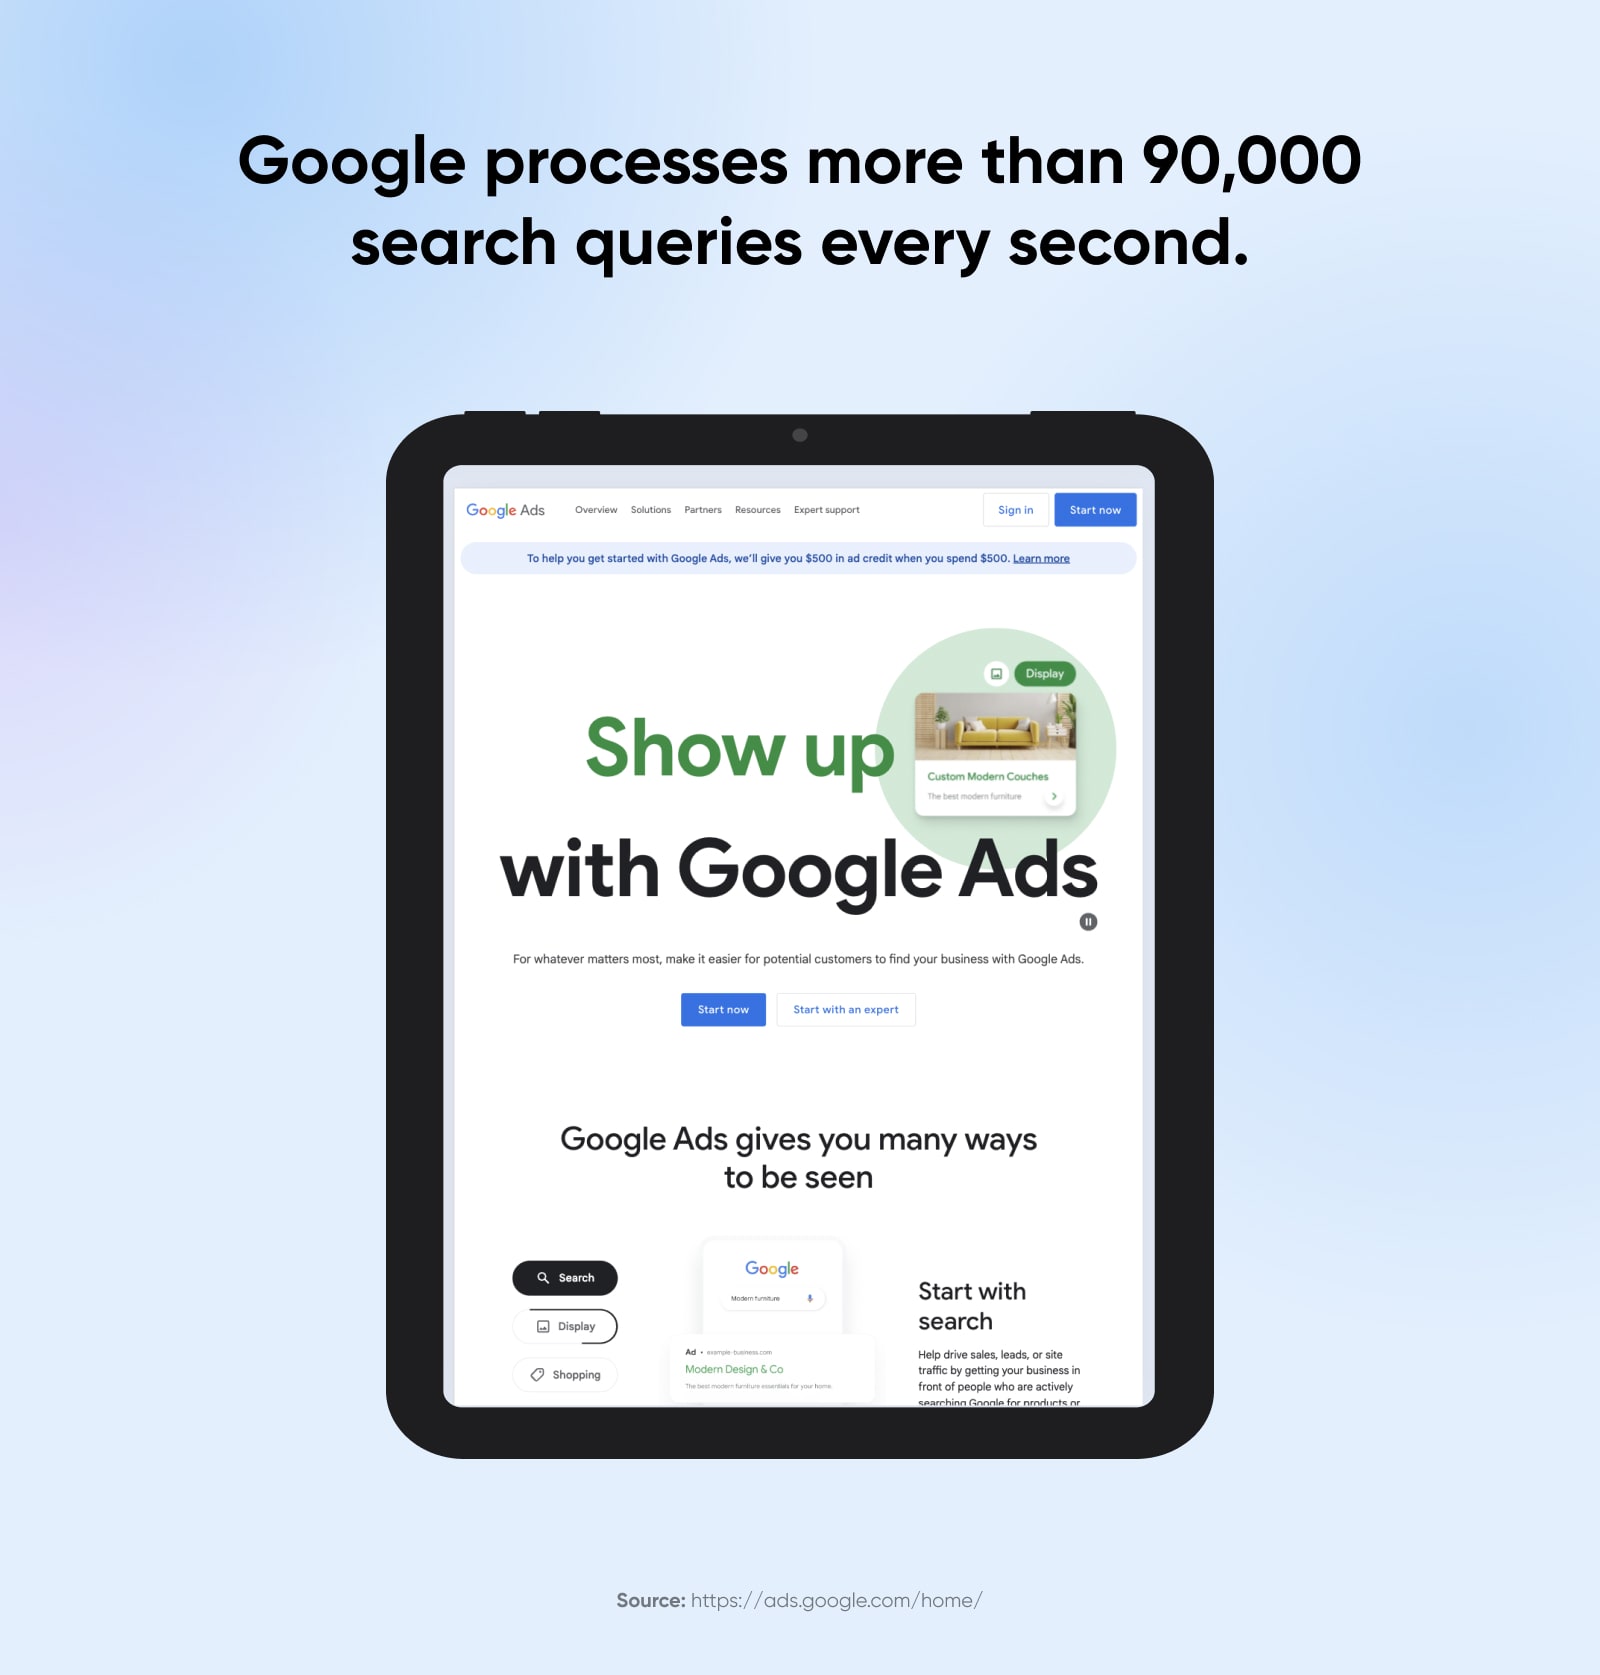 The home page for Google Ads appears against a light blue background